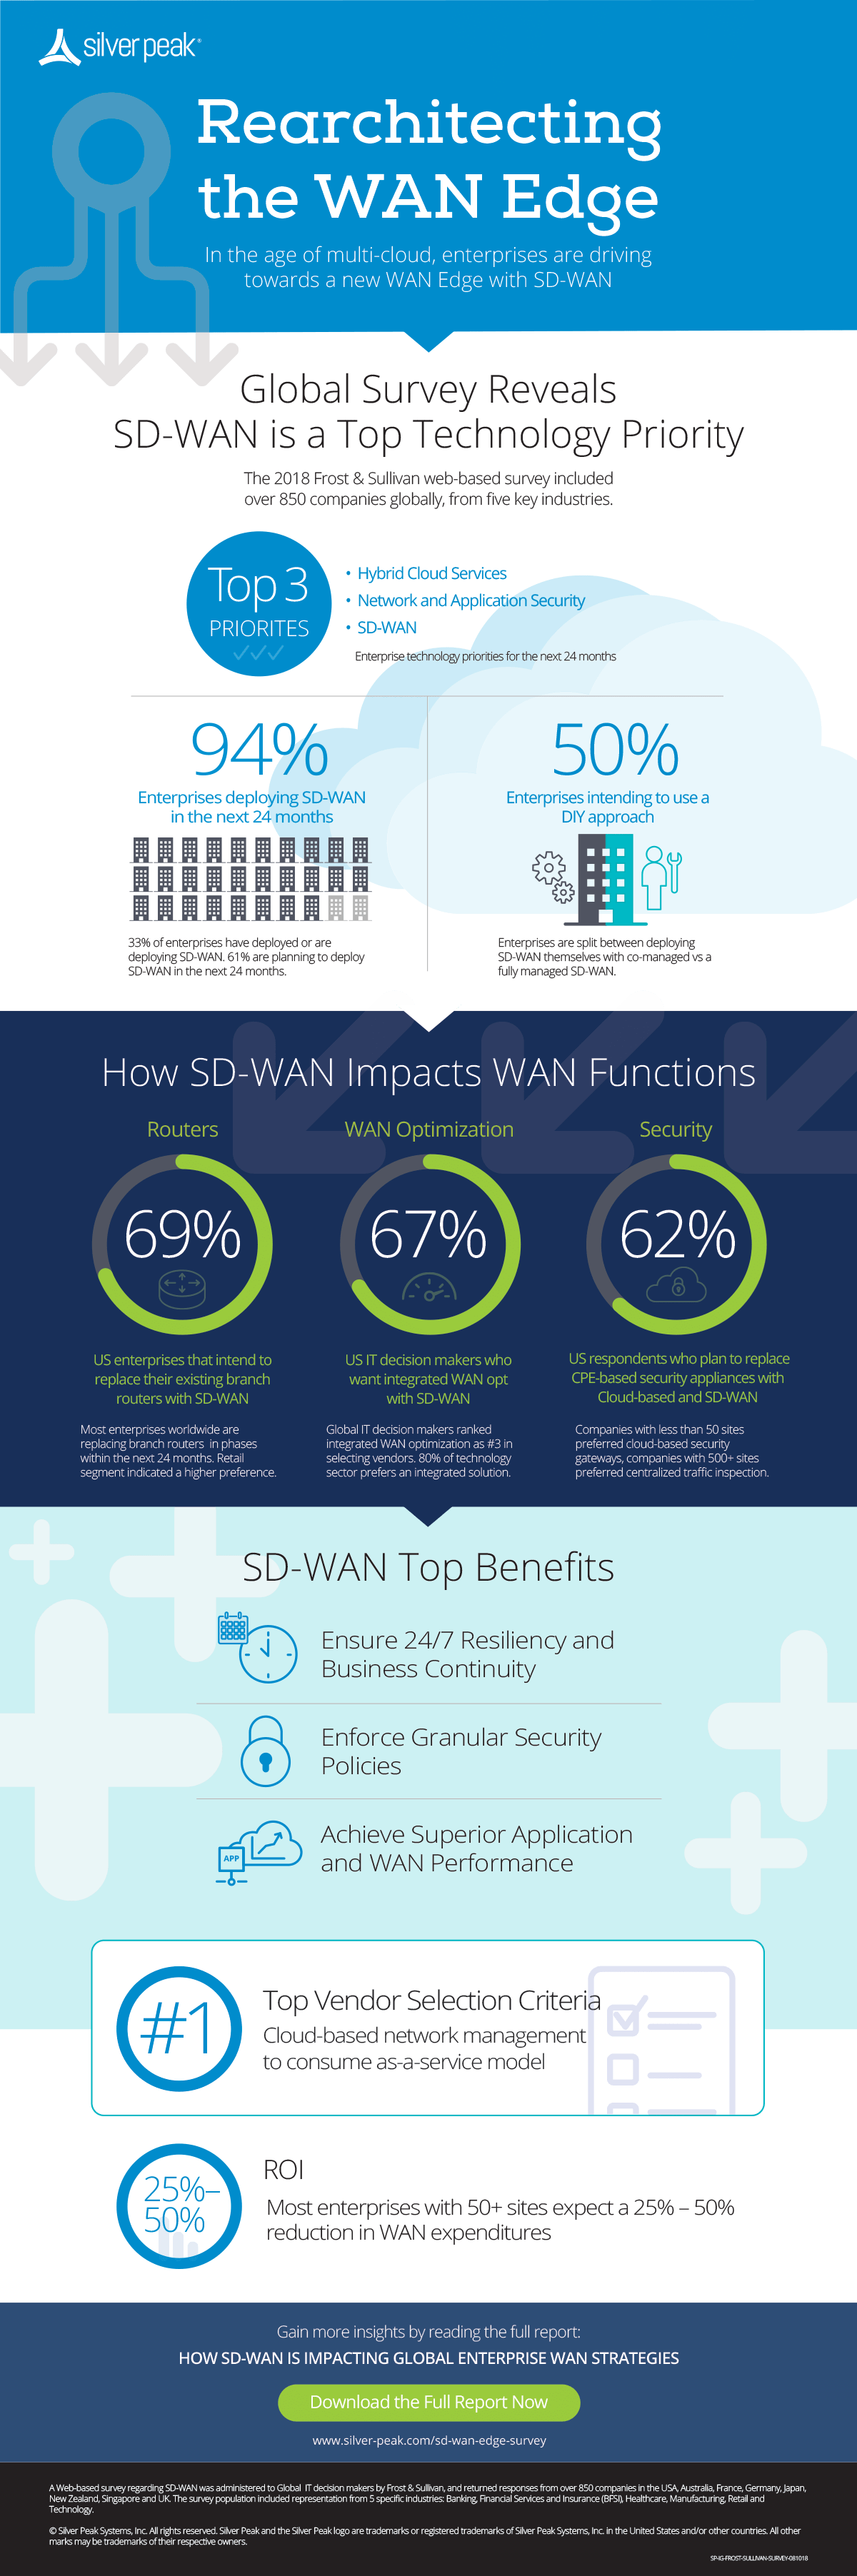 Rearchitecting the WAN Edge with SD-WAN Infographic